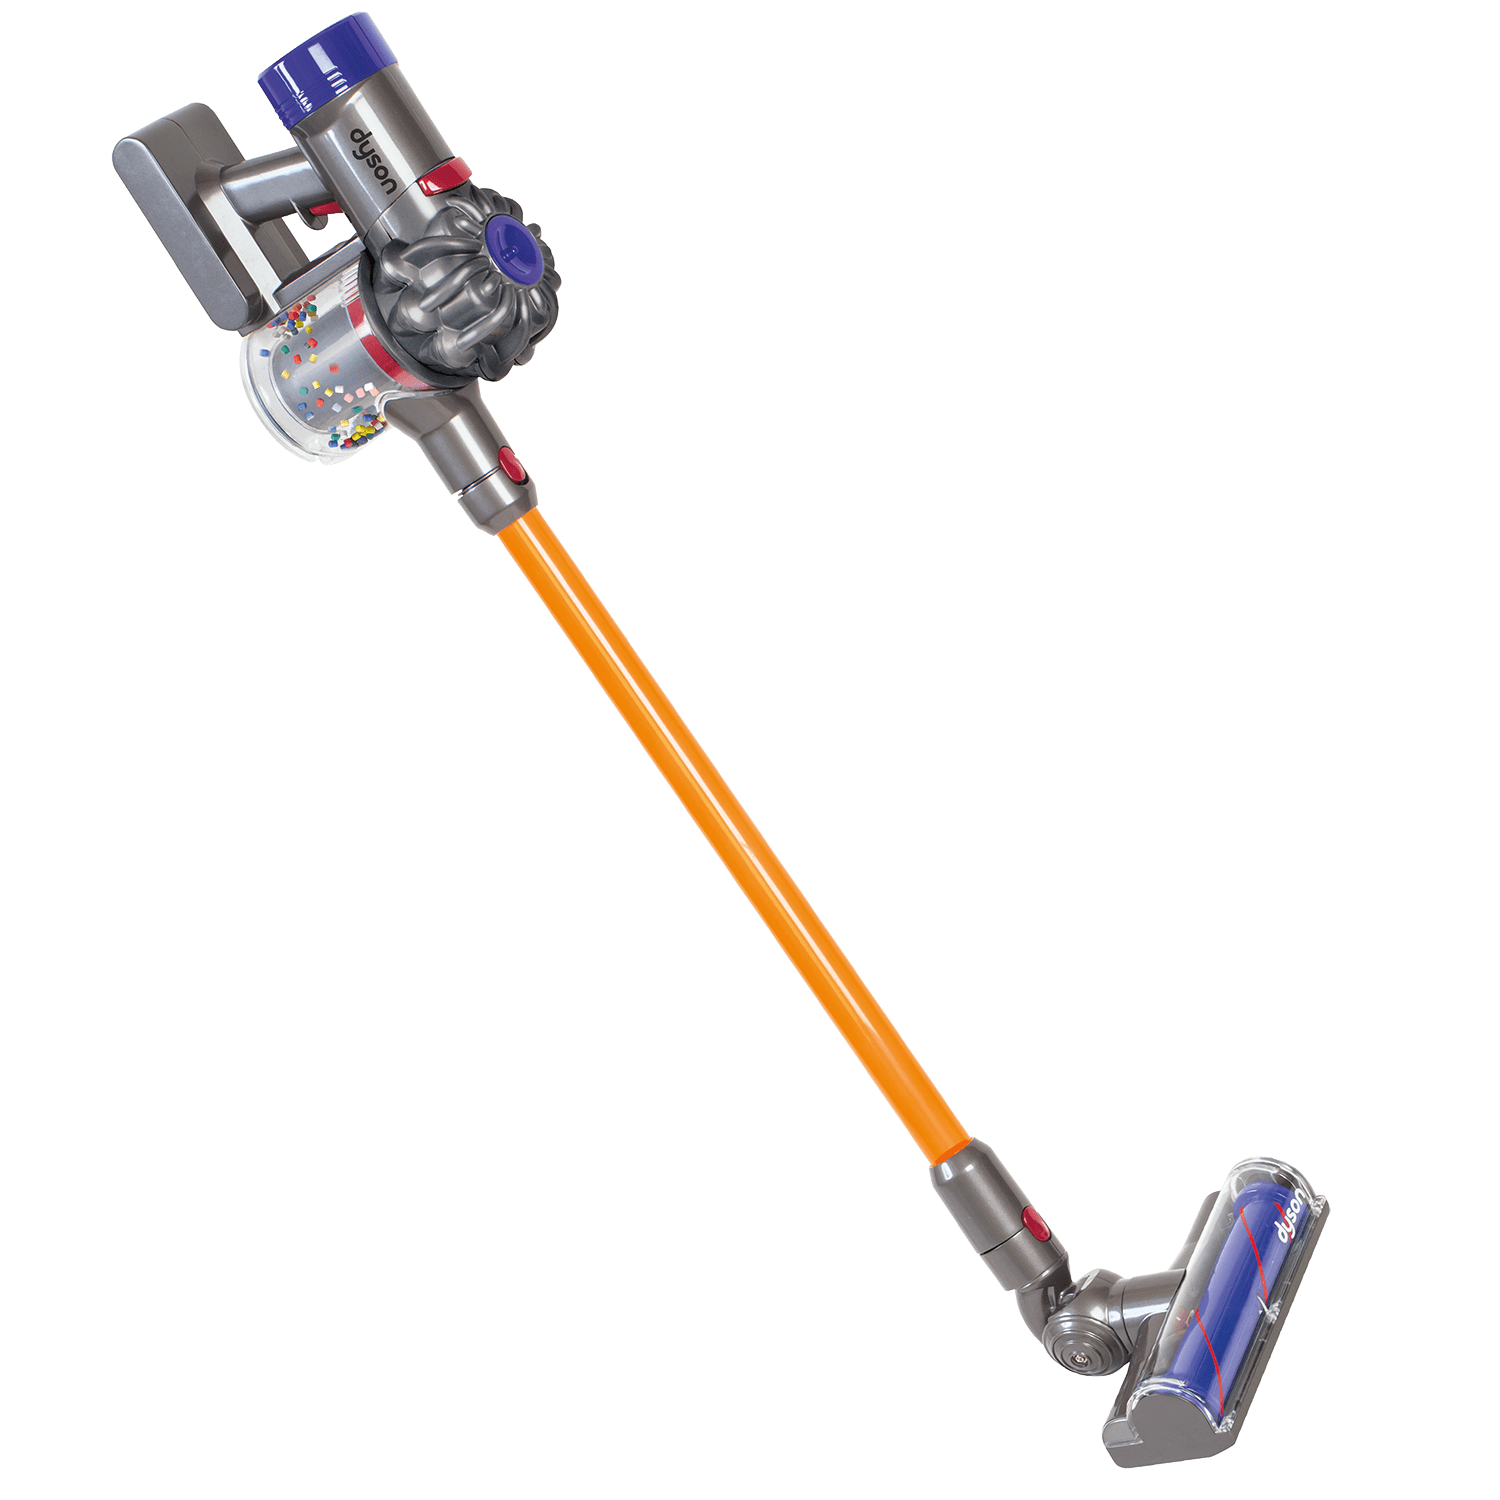 Children's Dyson Vacuum Cleaner Cleaning Role Play Realistic